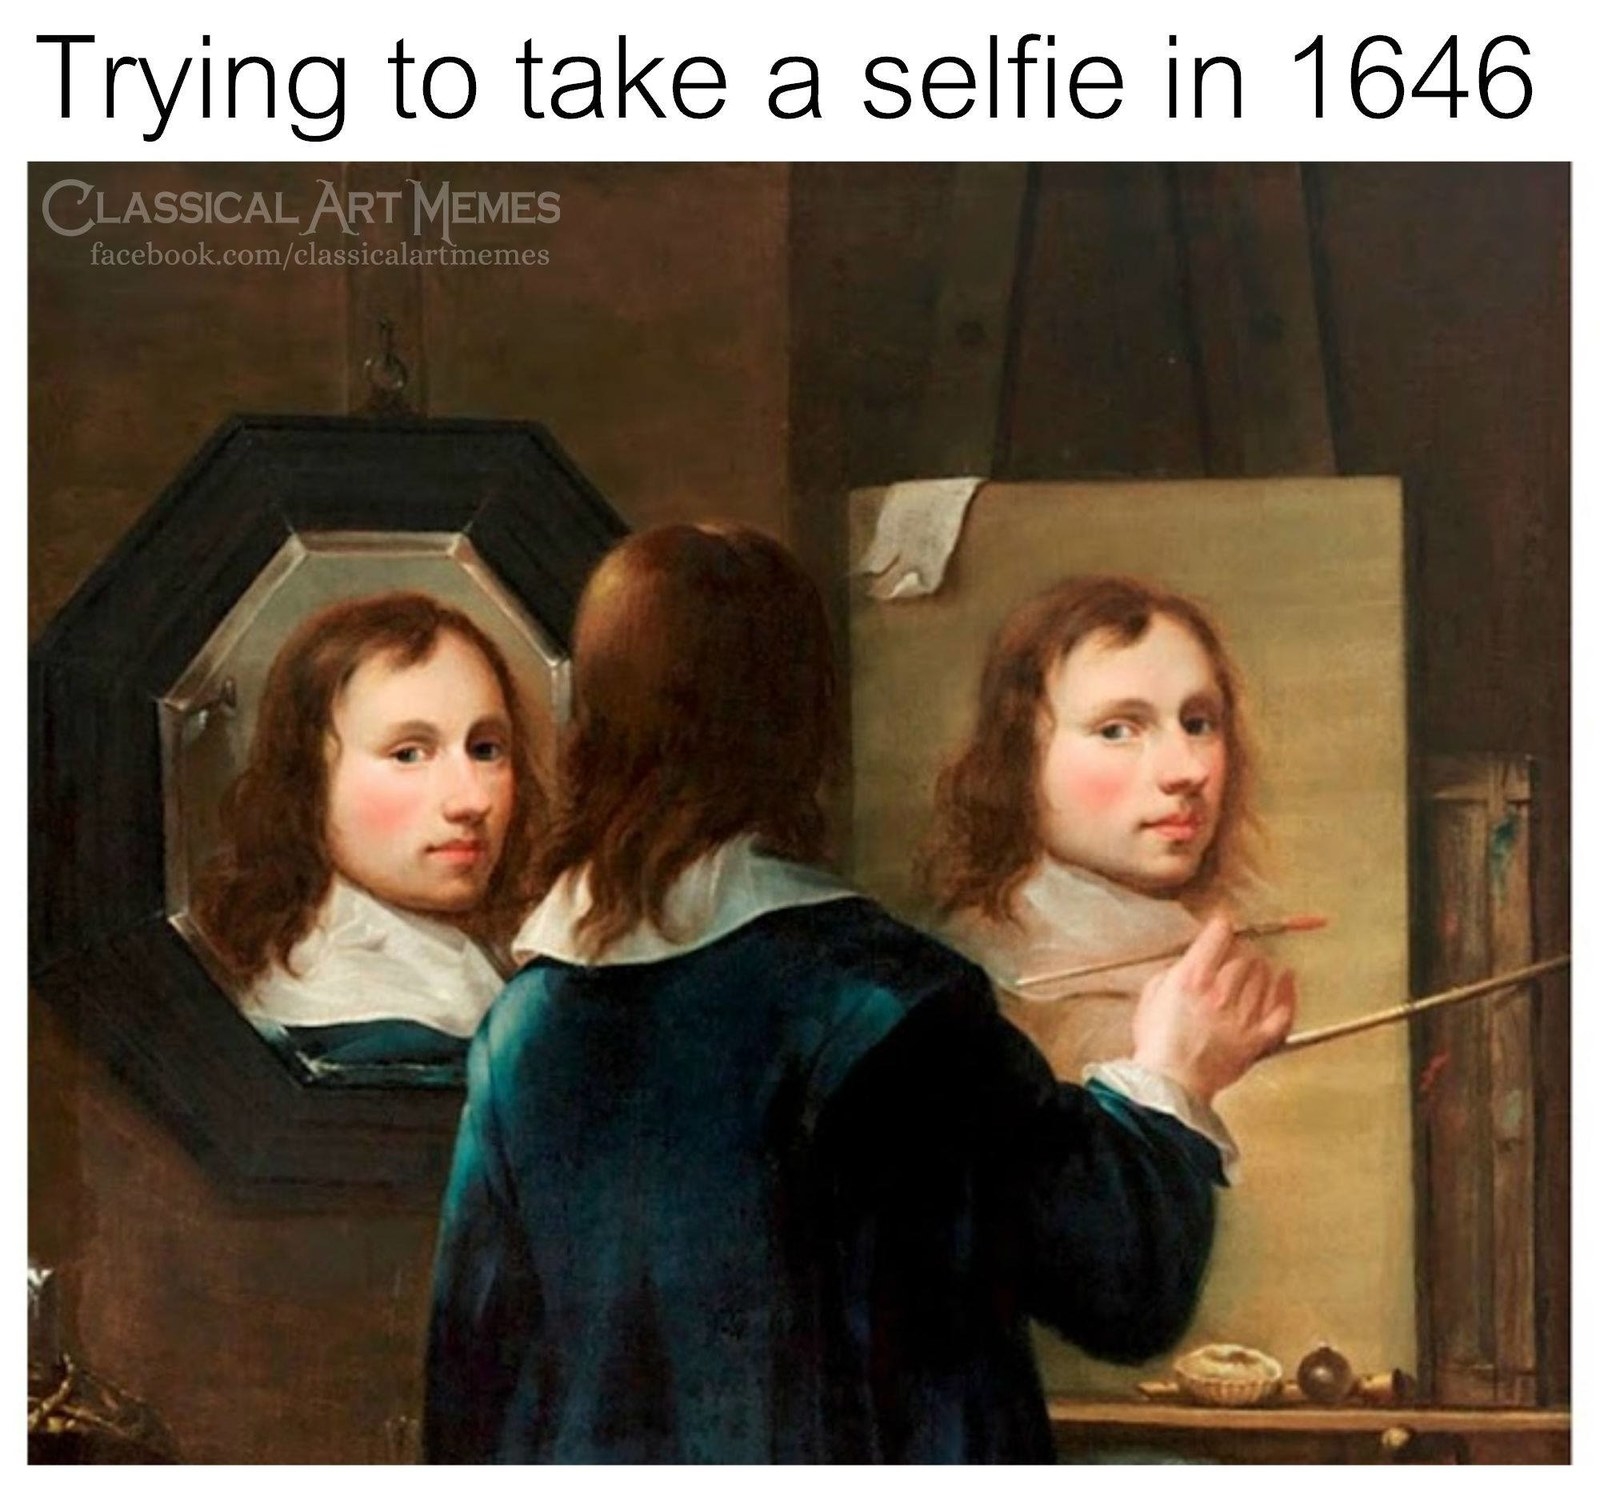 Here Are Hilarious Classical Art Memes That Will Leave You Rolling | My ...